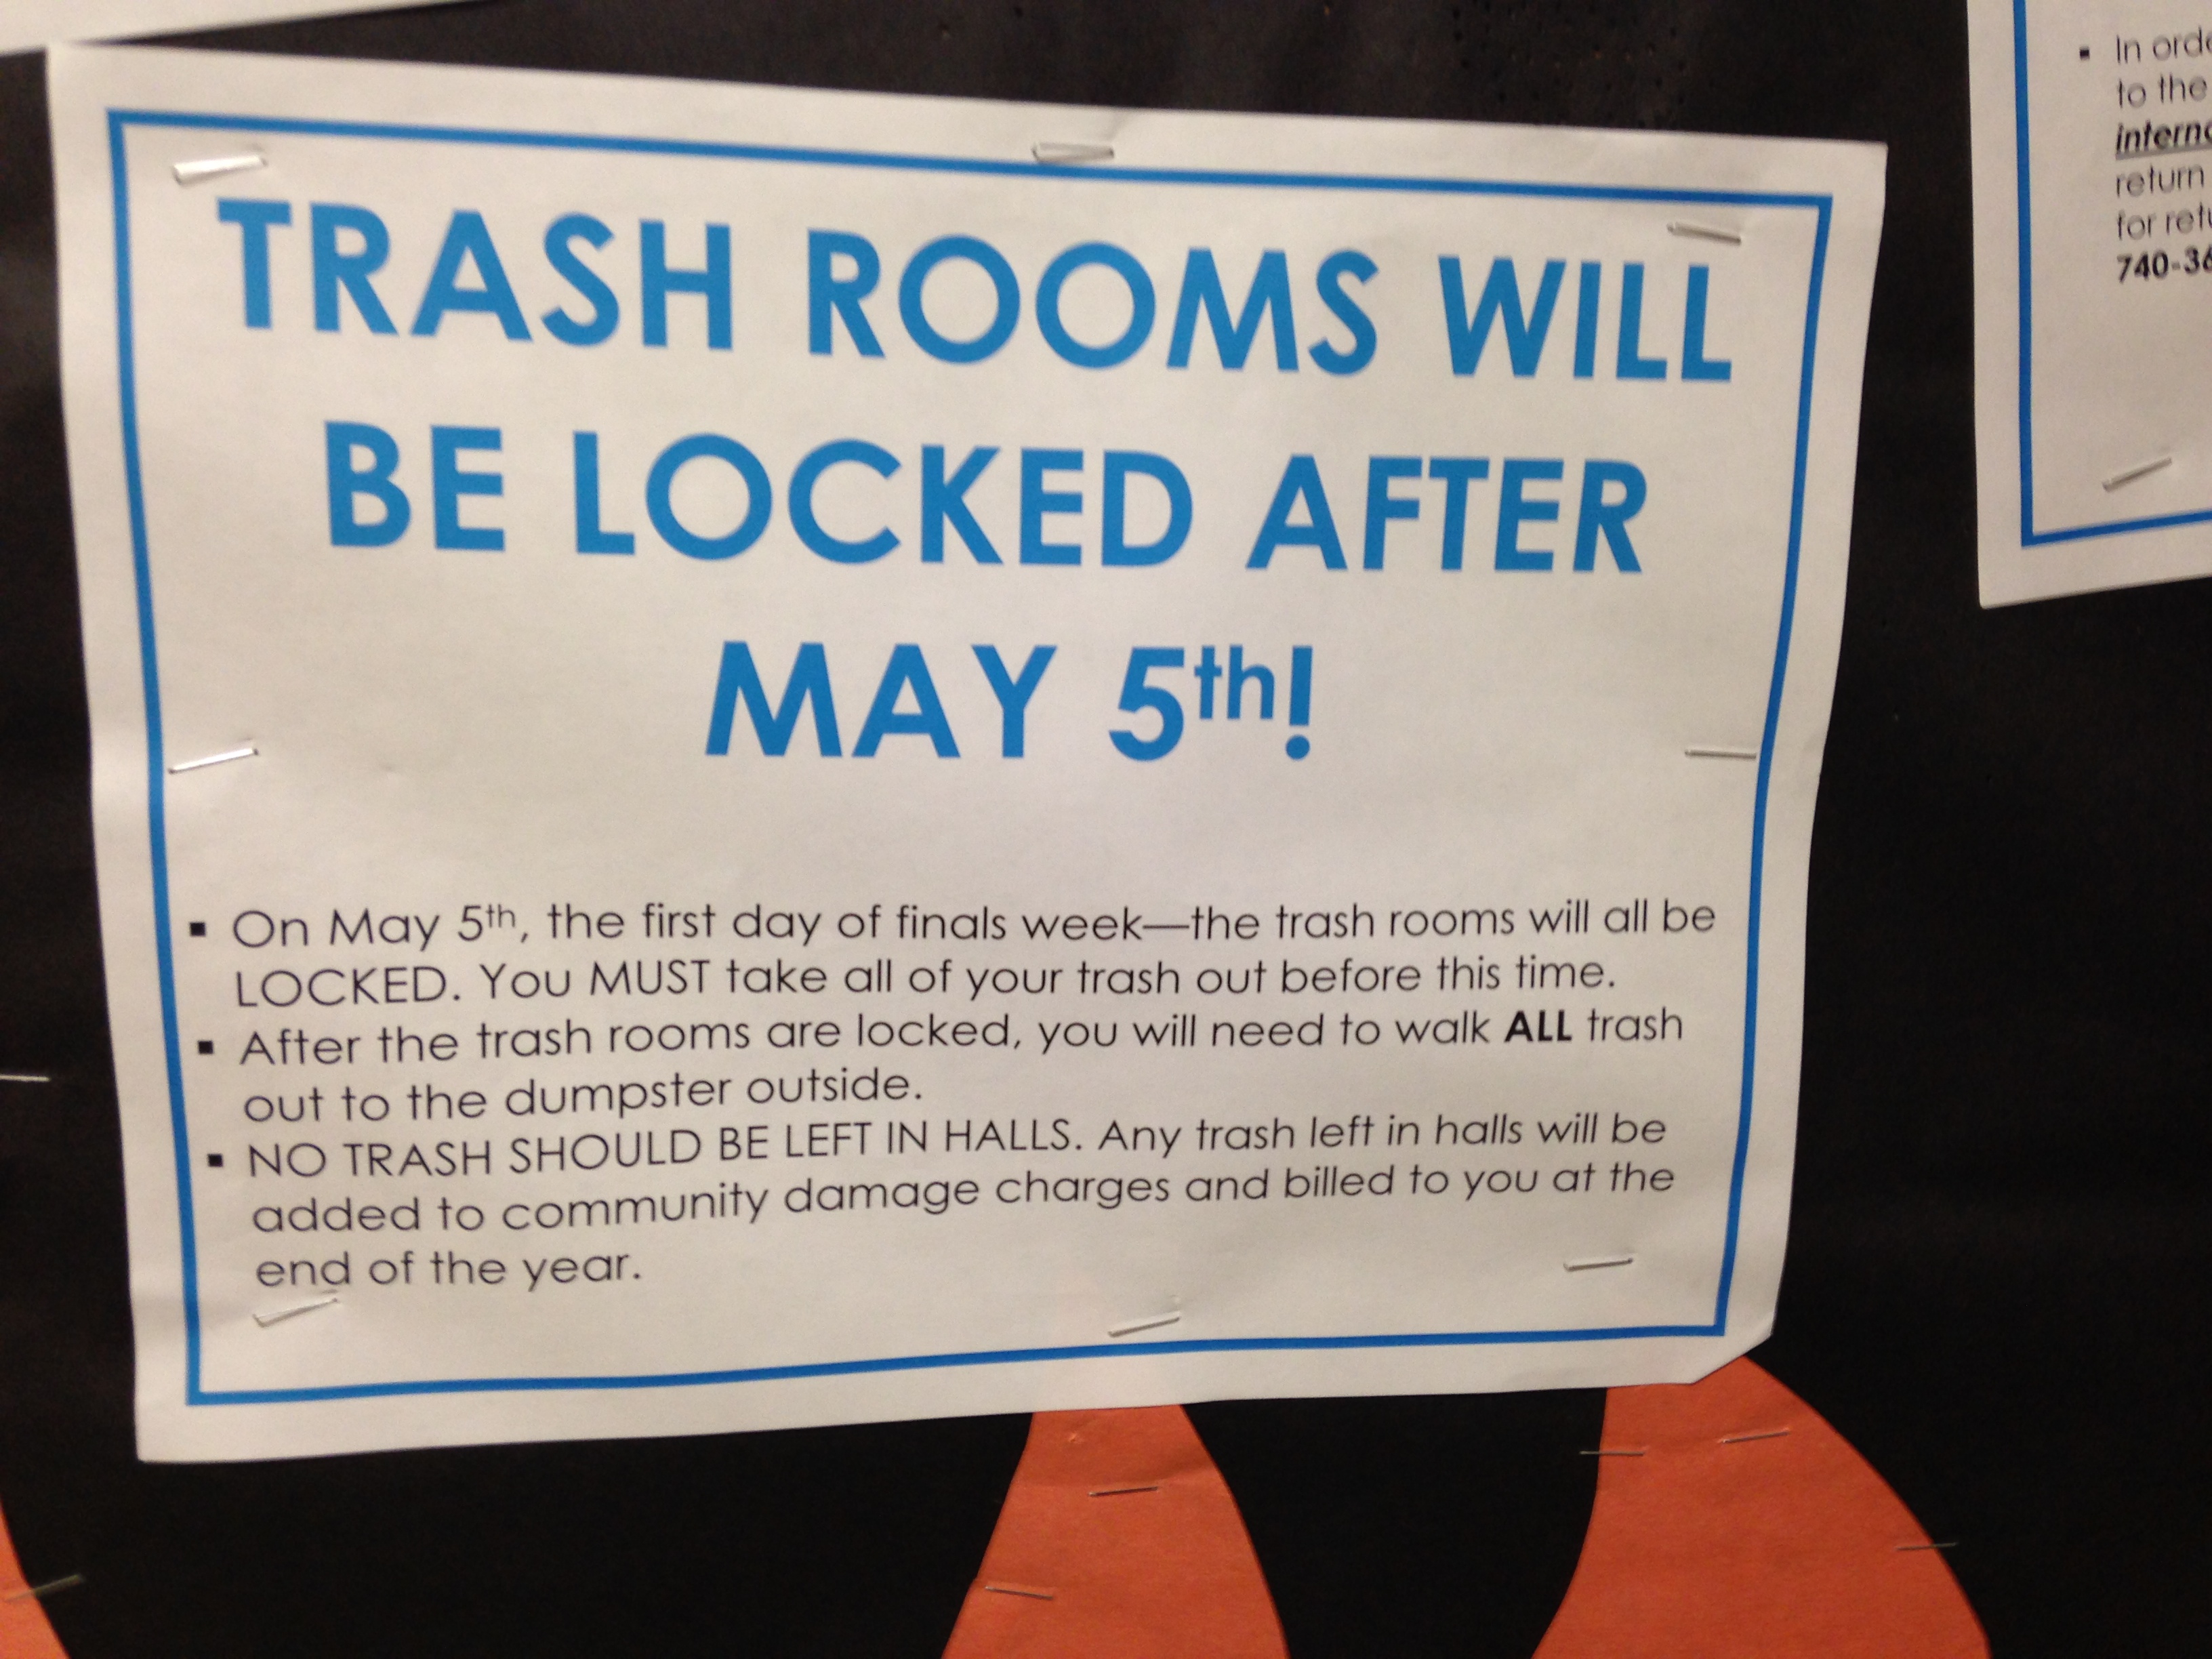 Trash room policy misses root problems